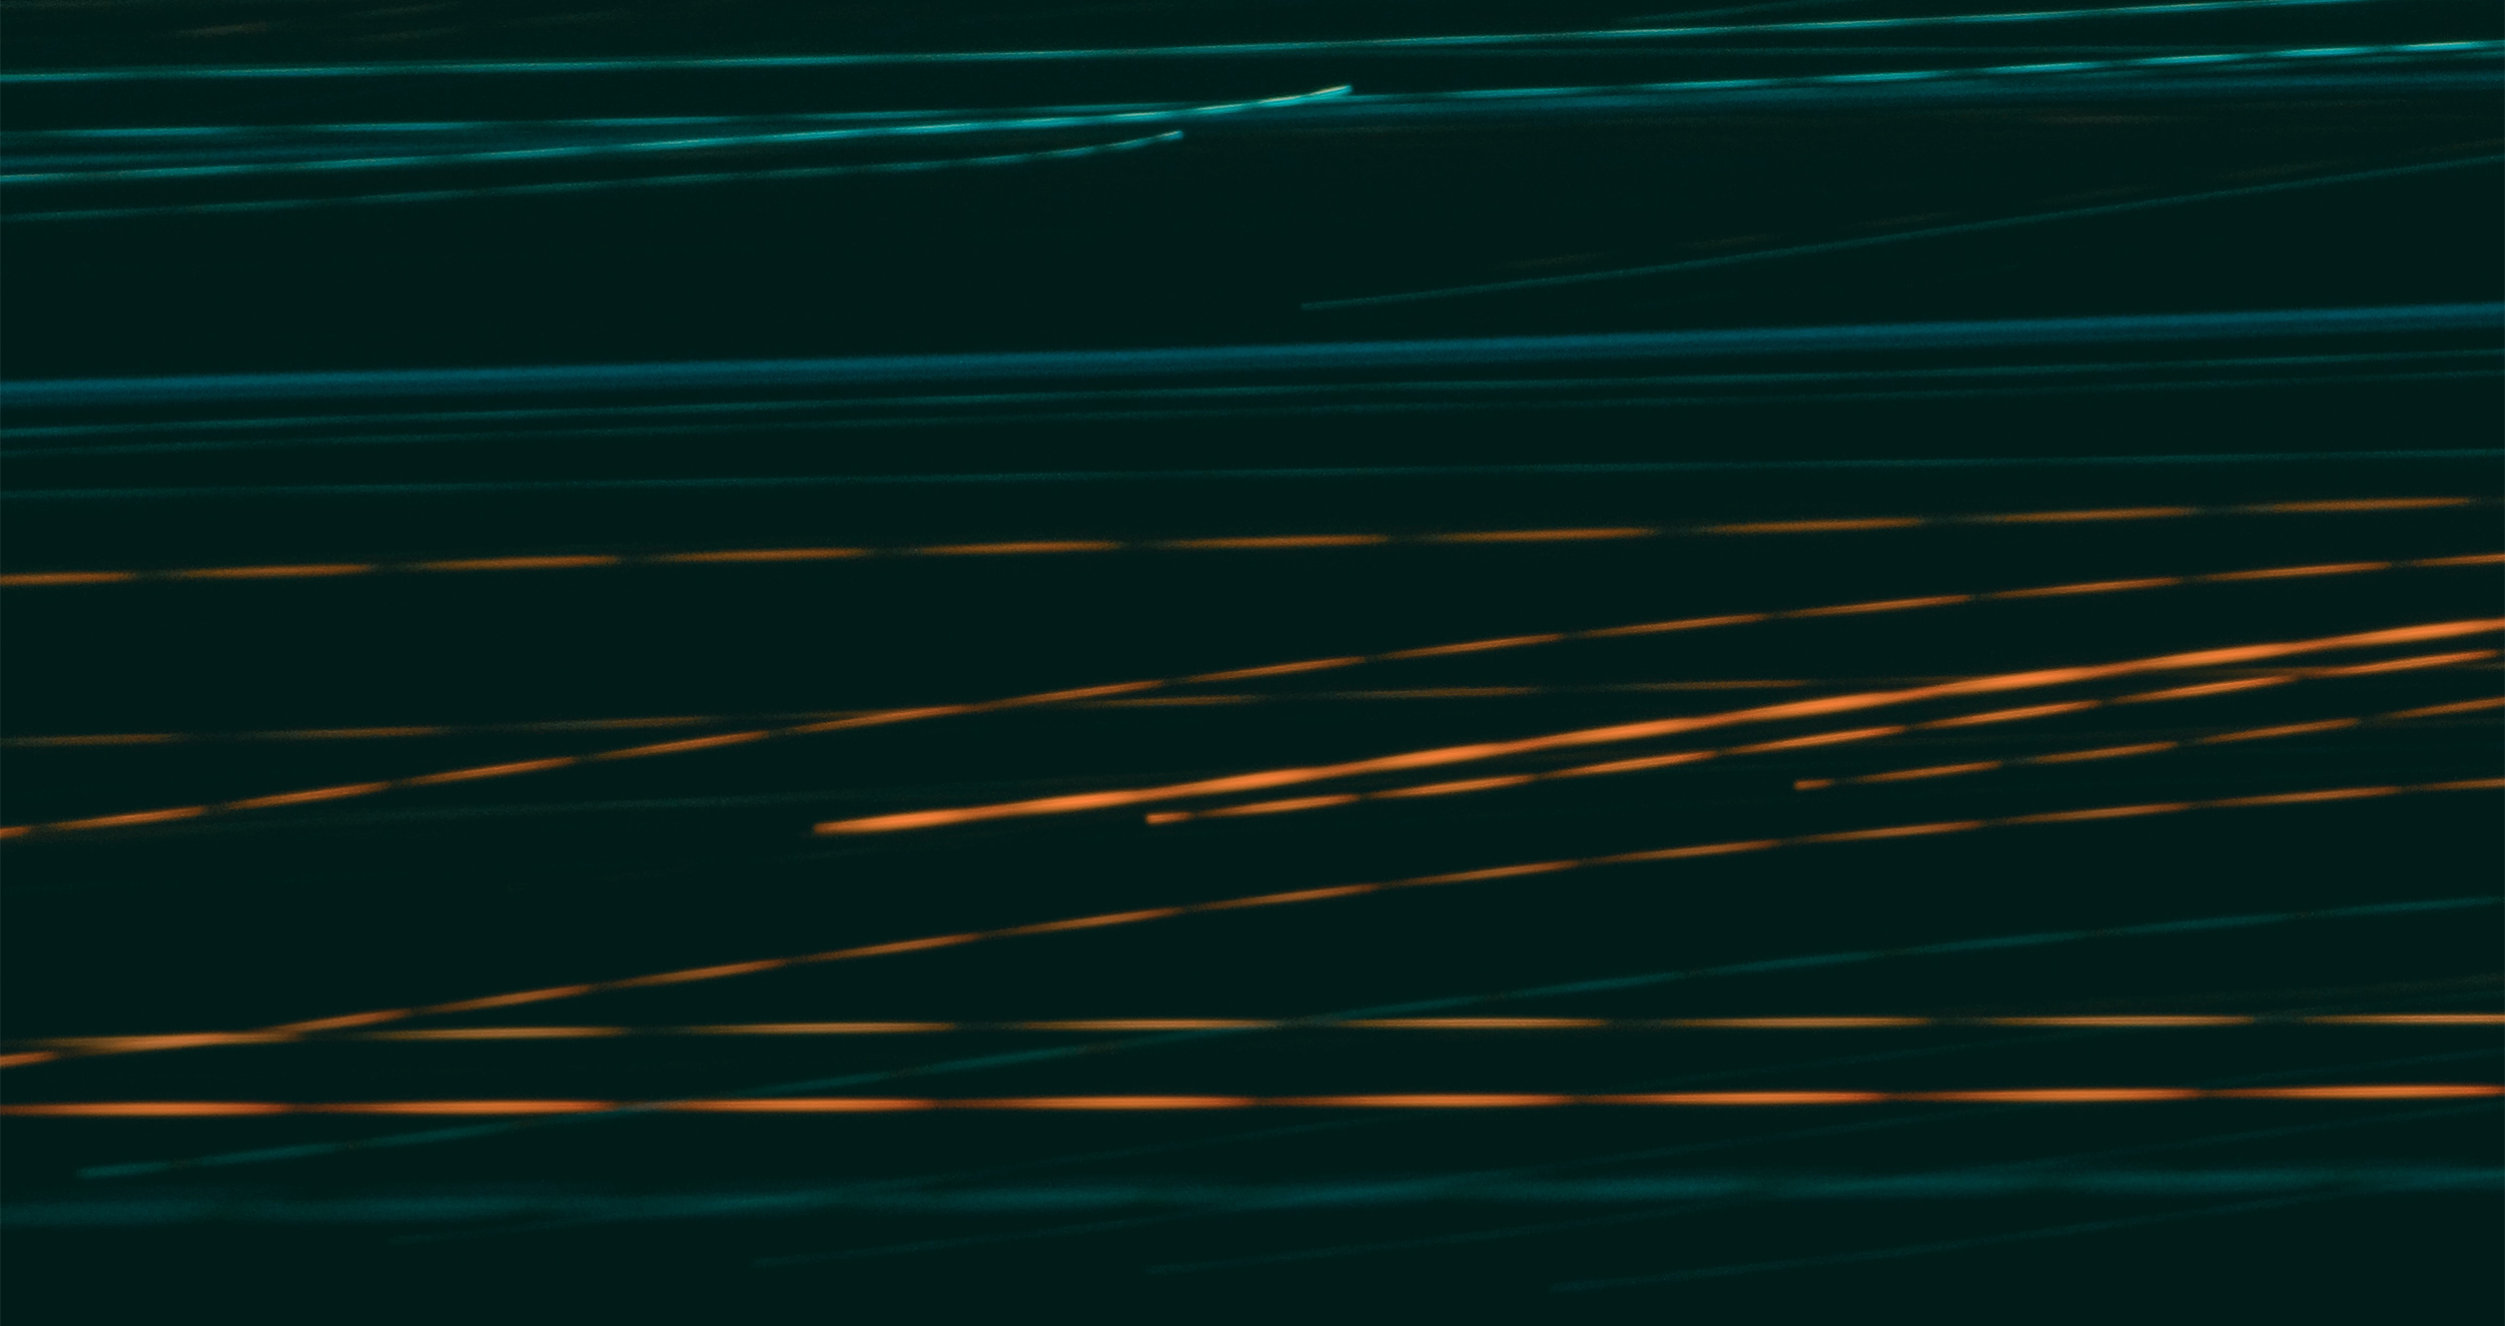 abstract green and orange light trails